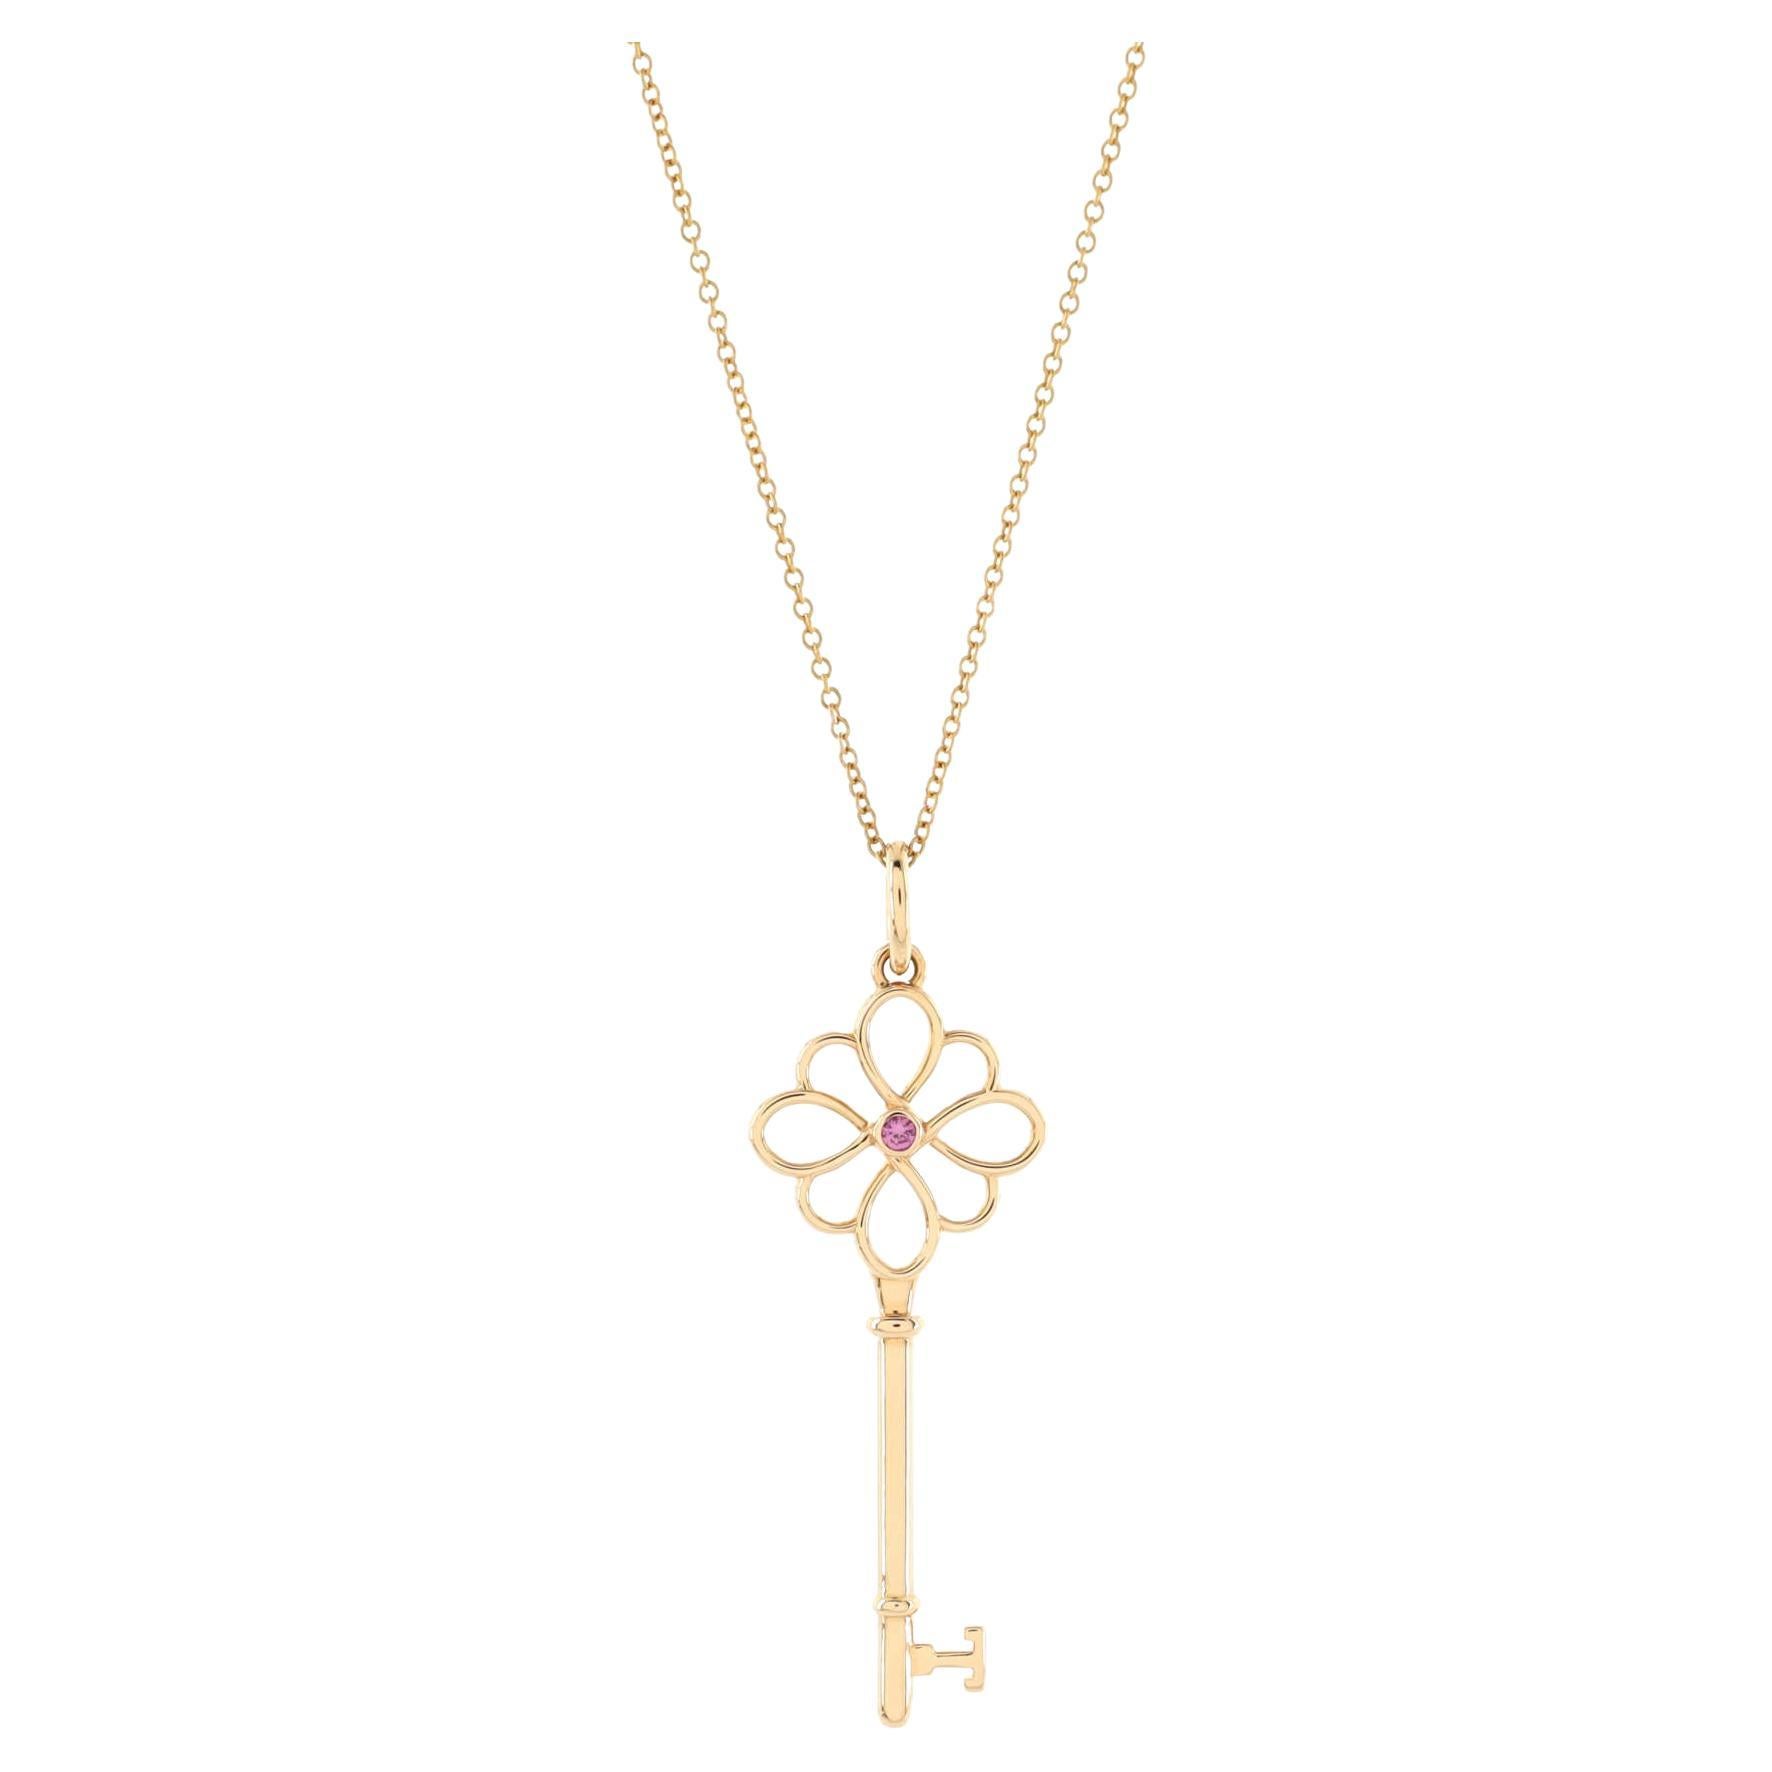 Tiffany & Co. Knot Key Pendant Necklace 18k Rose Gold with Pink Sapphire